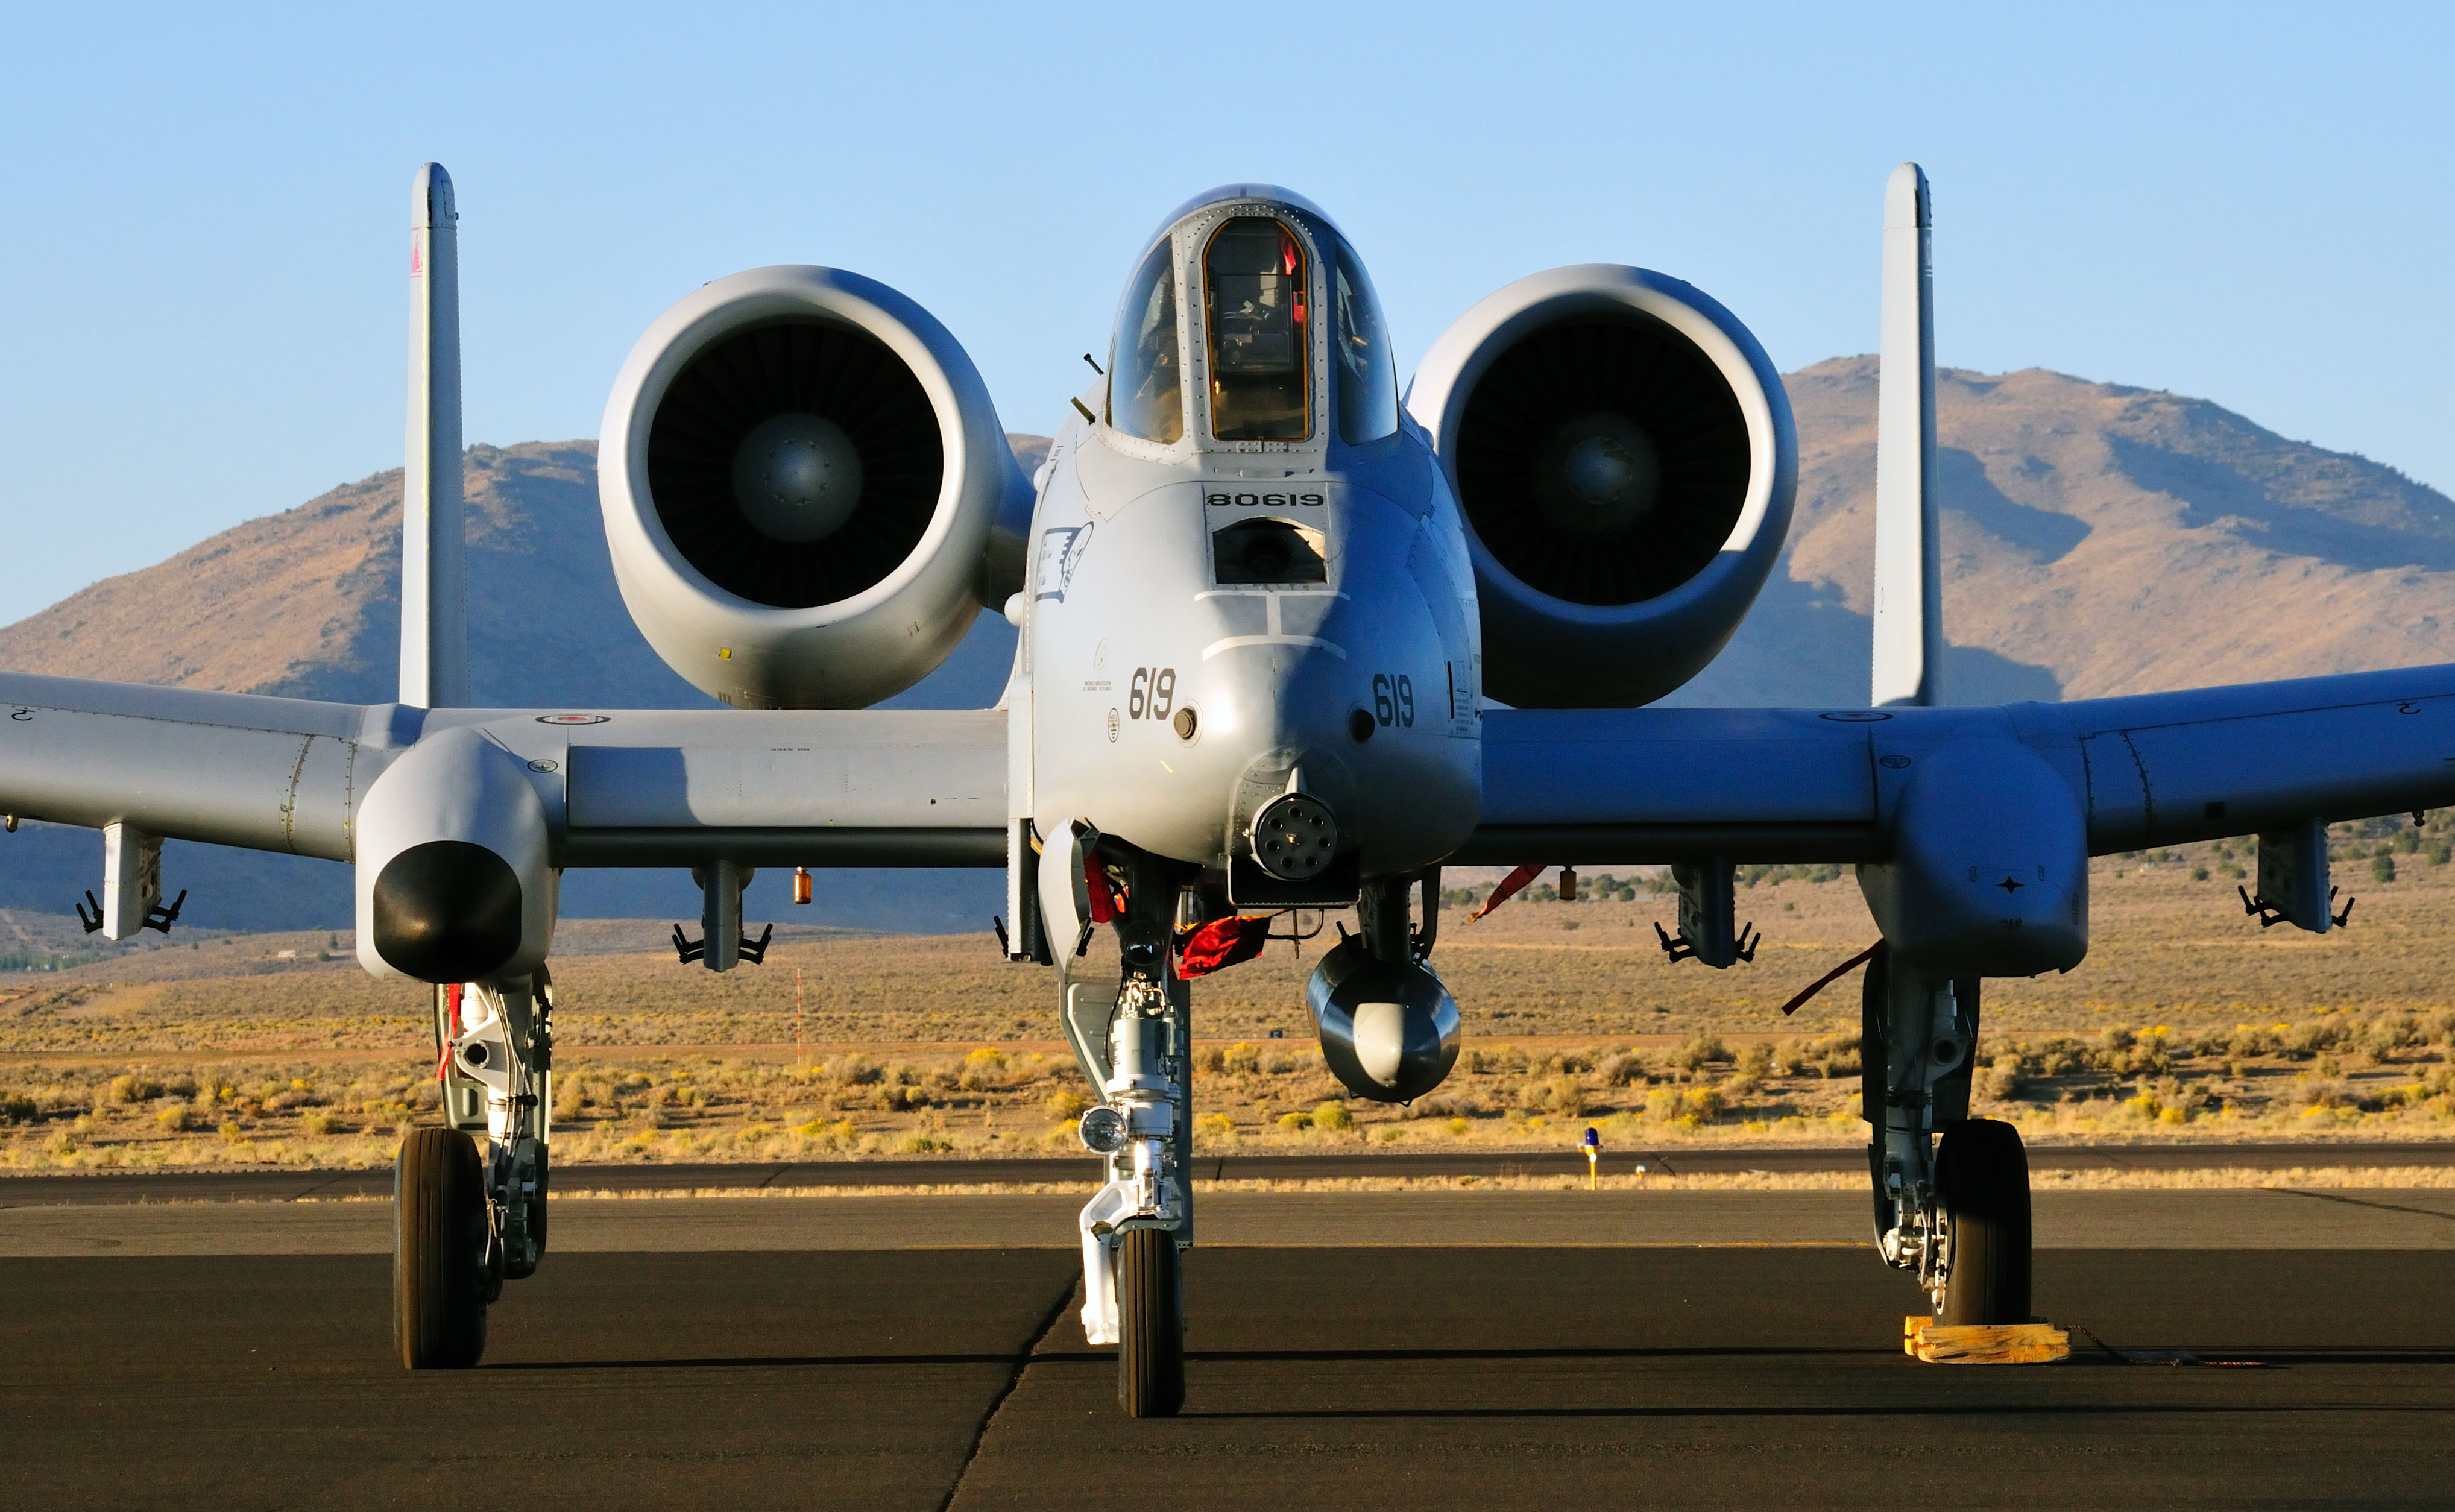 Generally, one does not want an A-10 Warthog with it's 30mm cannon pointed directly at them.